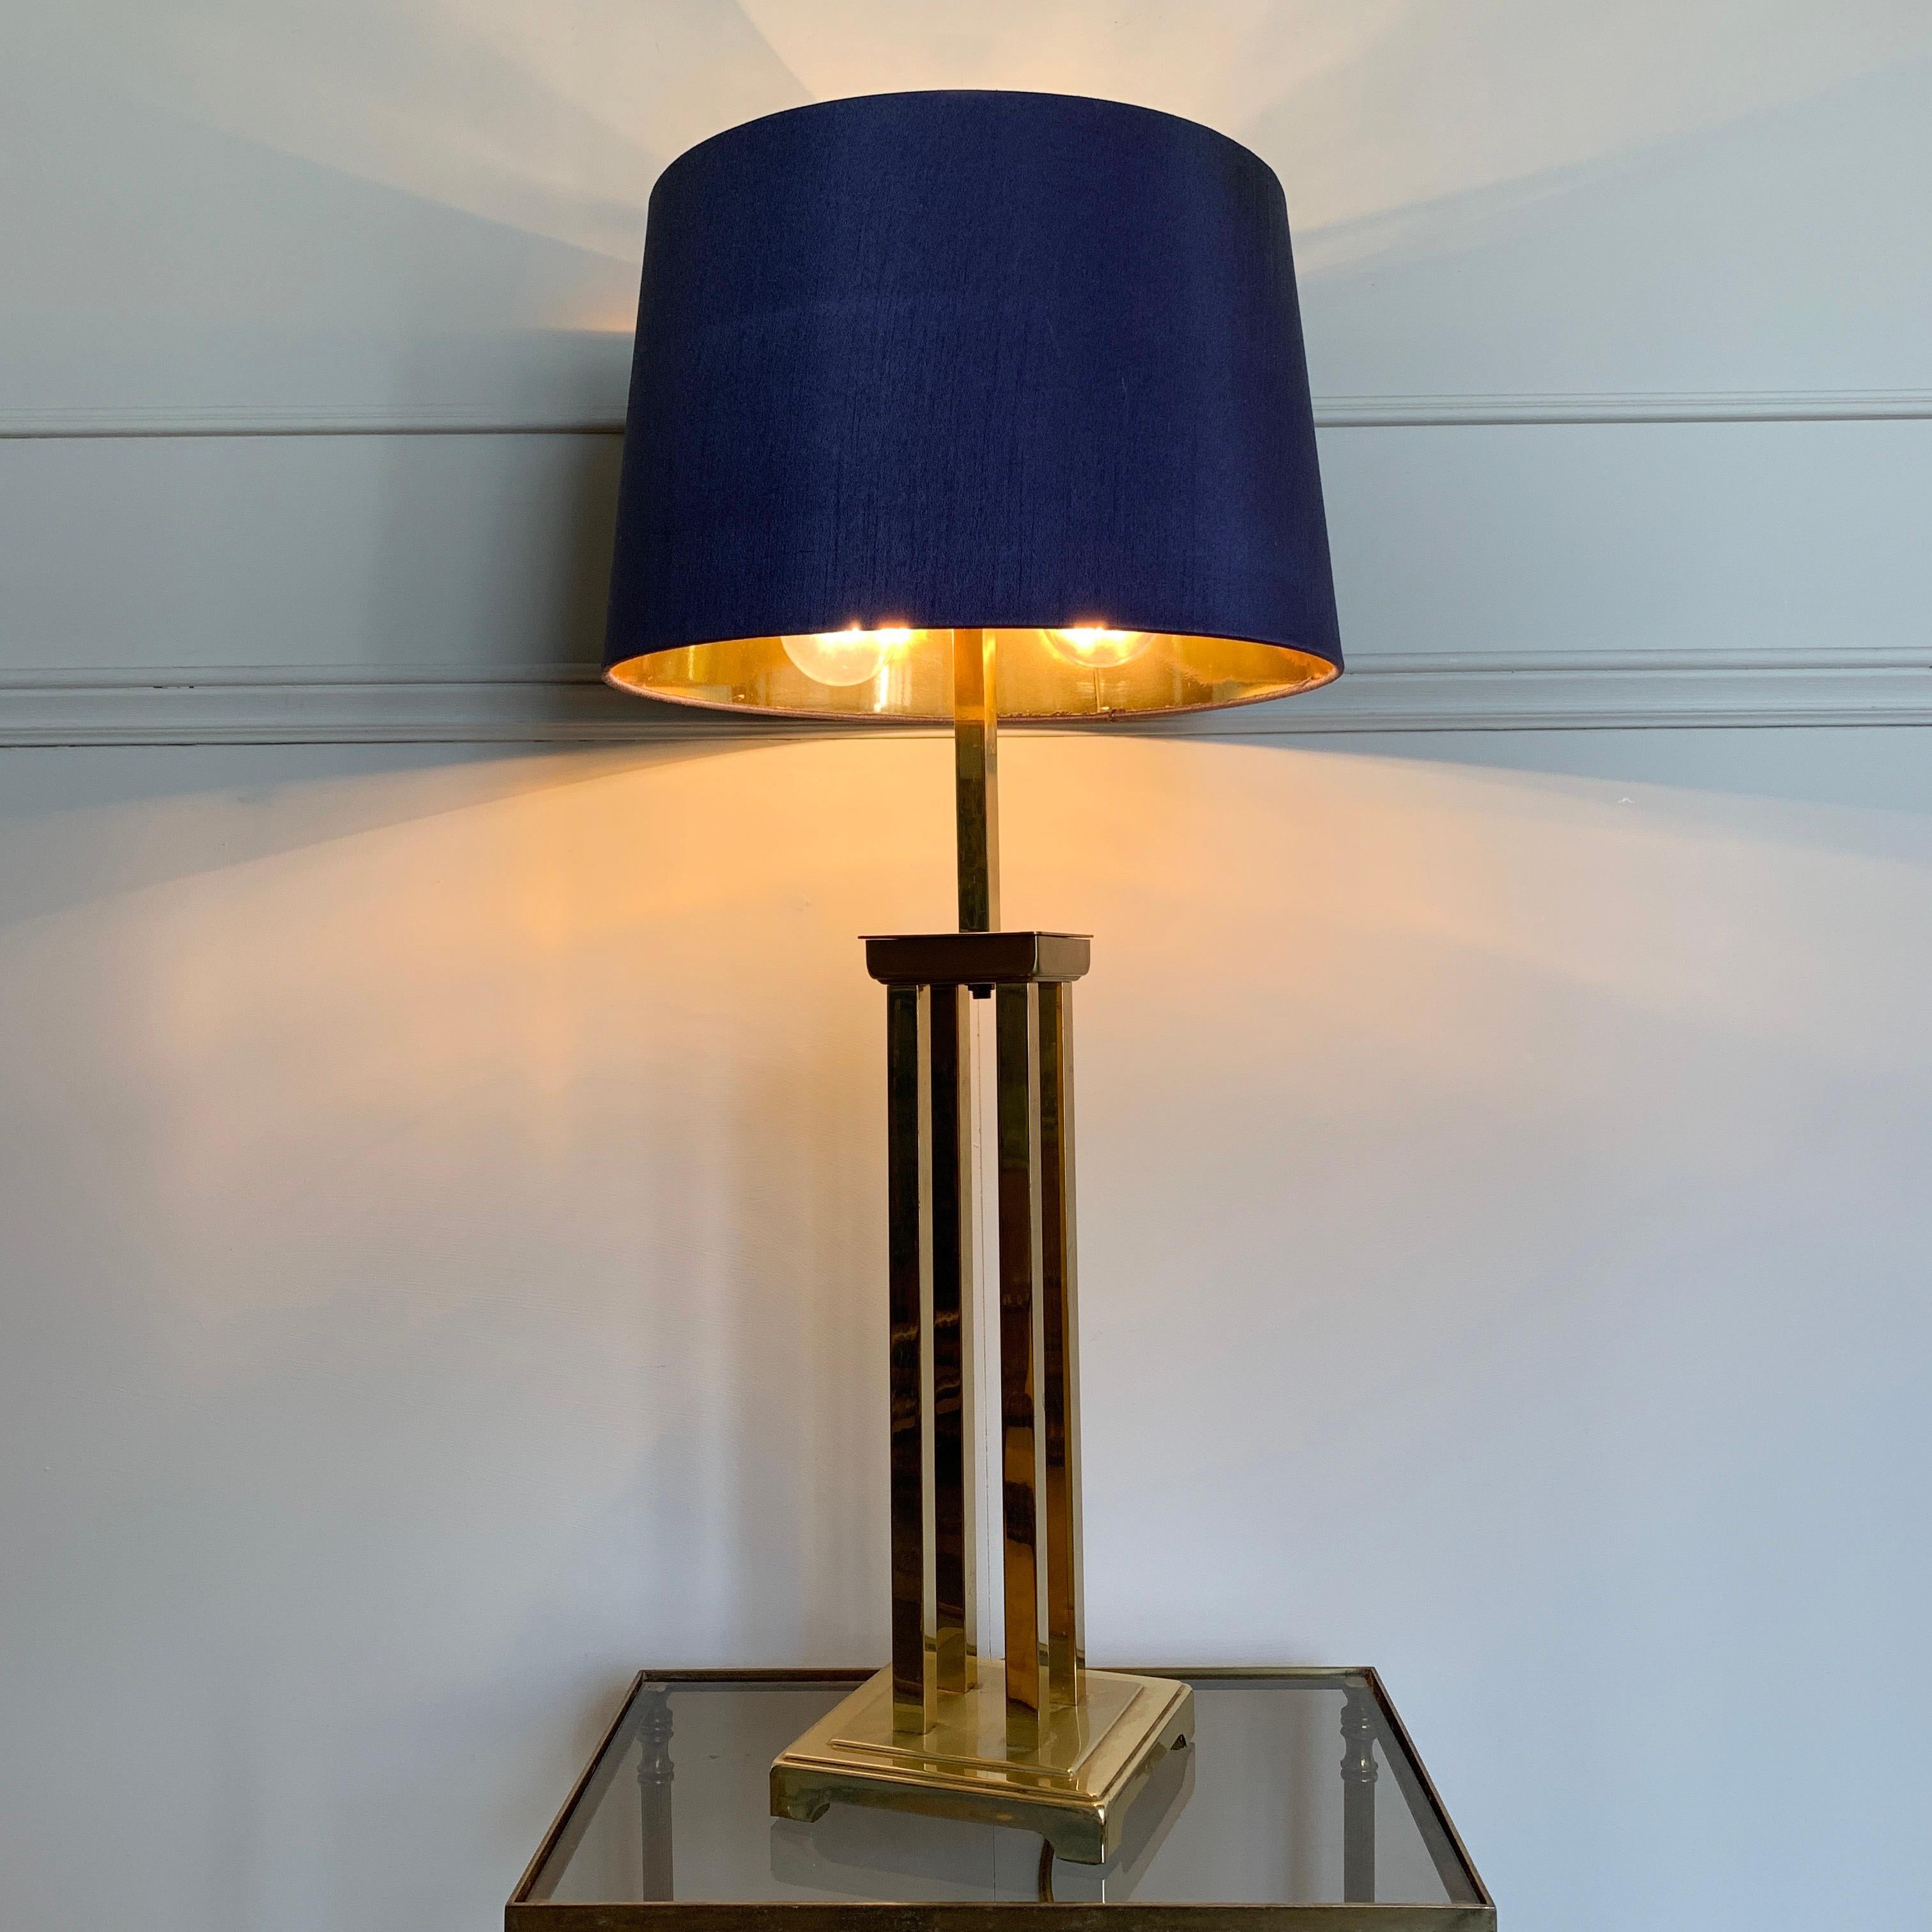 Romeo Rega attributed Cubist brass table lamp, 1970s Italy
A heavy good quality lamp made from solid metal, brass-plated
Replacement modern shade in graphite grey with metallic gold inner (looks more blue in photograph but is grey)
78cm height, base